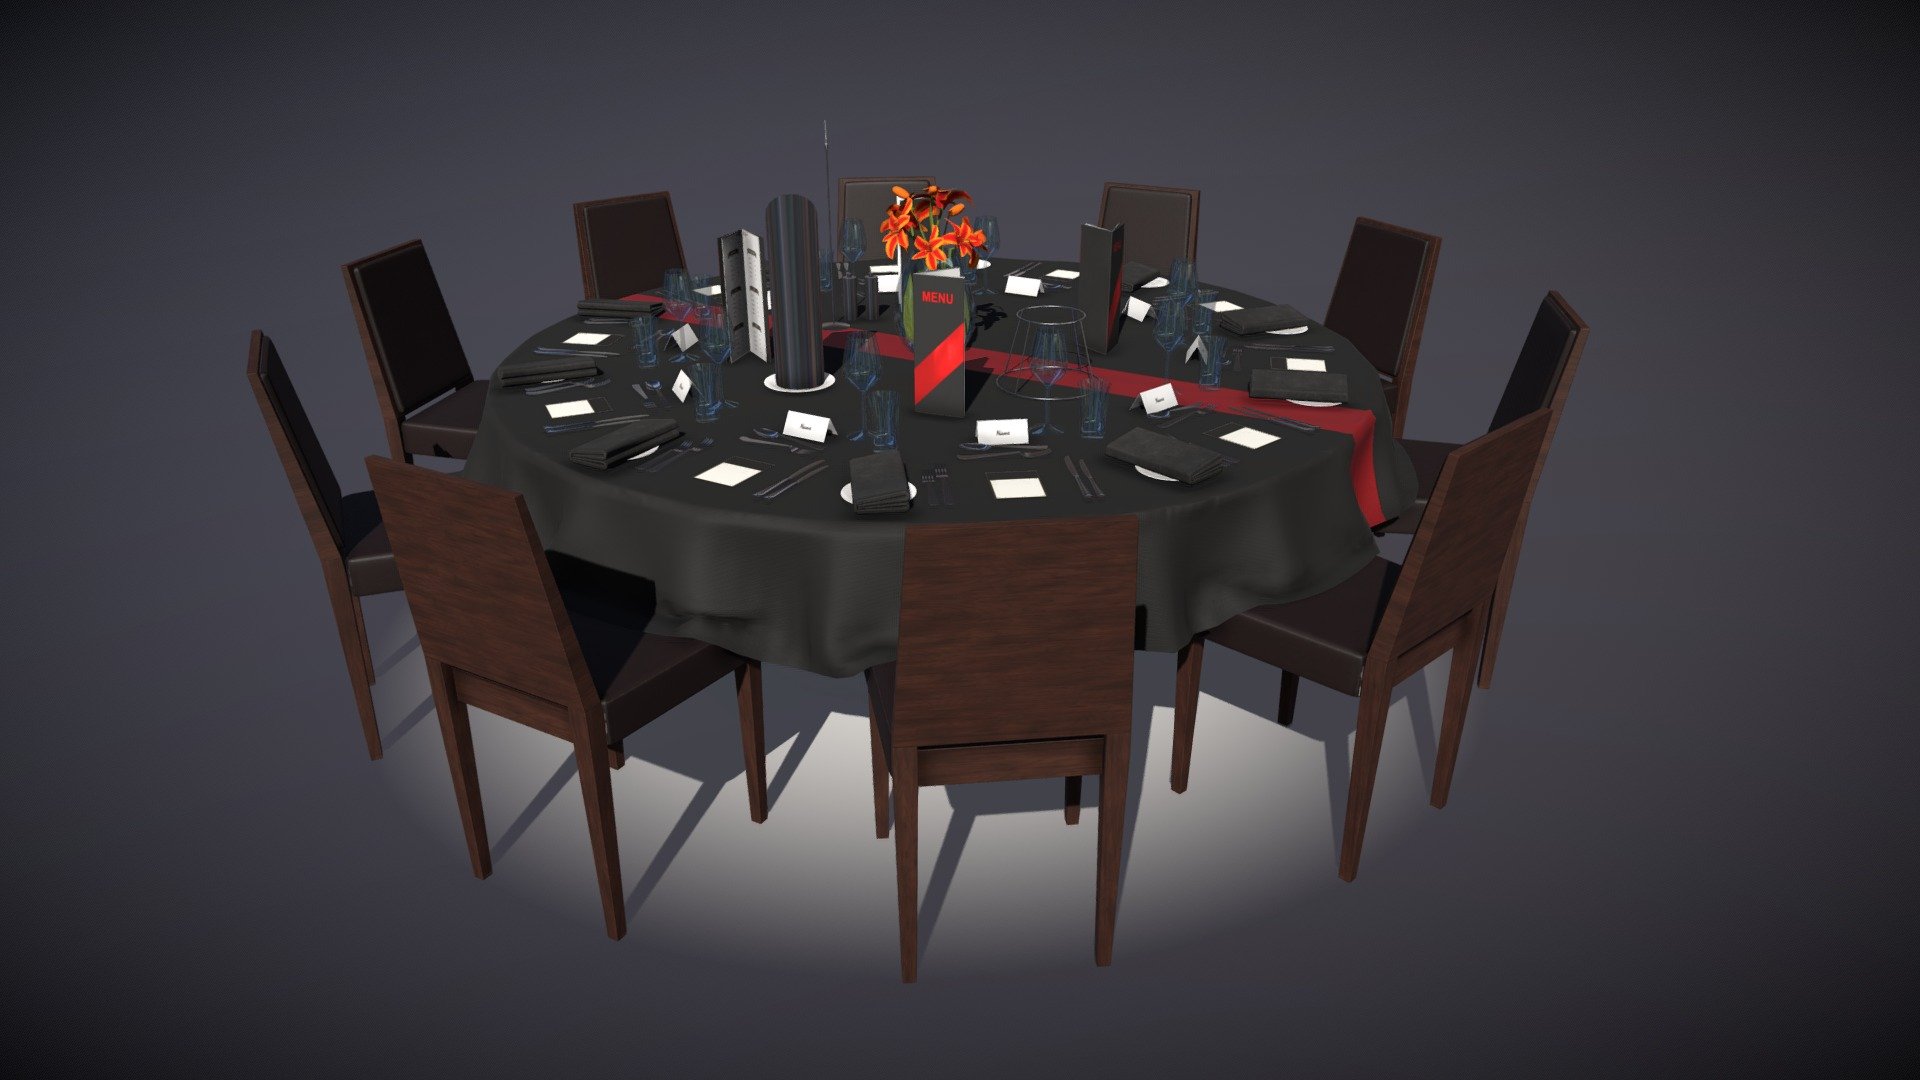 Round Table Setting - 2k PBR Textures • Albedo • Metalness • Roughness • Normal • AO-



Assets Pack Includes • Dining Table • Dining Chairs • Plates • Menu's Glasses • Flower Arangement • Water Jug • Cutlery • Name Cards • Napkins • Table Number - SALE Round Table Setting - Buy Royalty Free 3D model by rvh 3d model